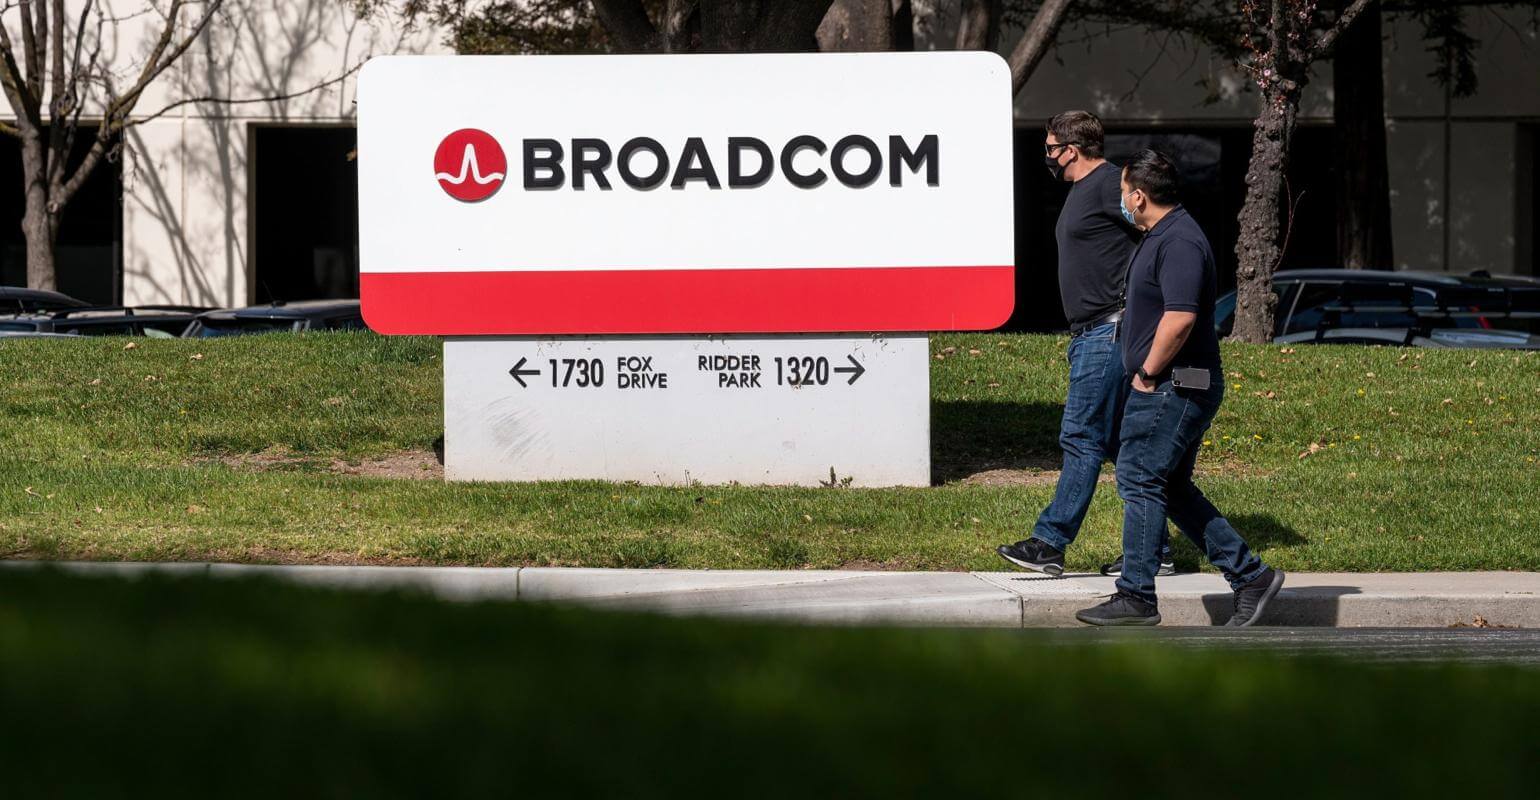 Broadcom Stock Analysis and Predicting the Growth of a $5000?